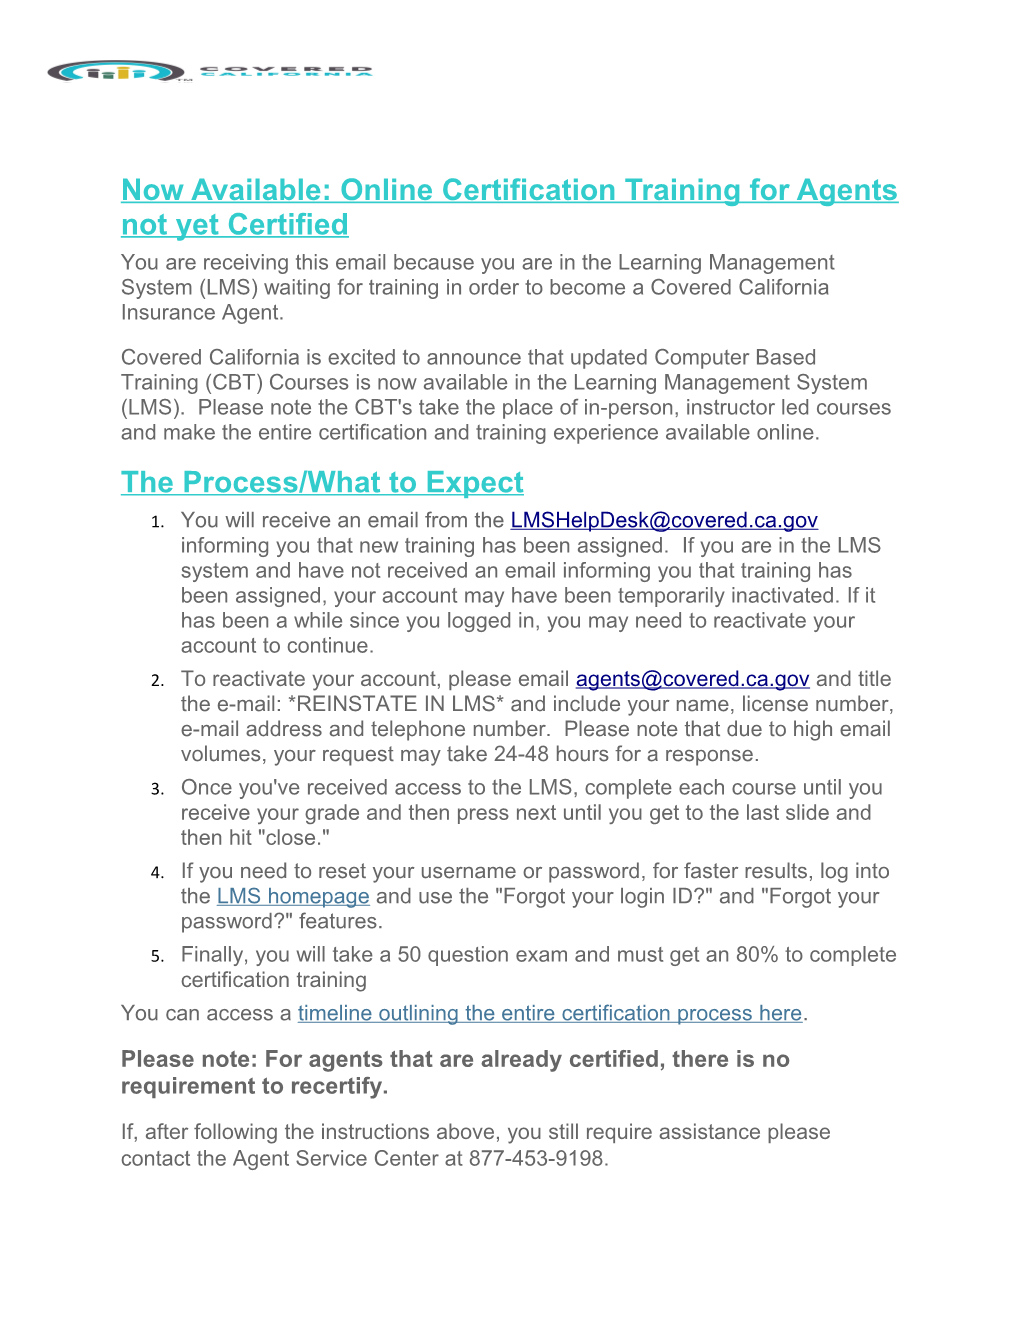 Now Available: Online Certification Training for Agents Not Yet Certified